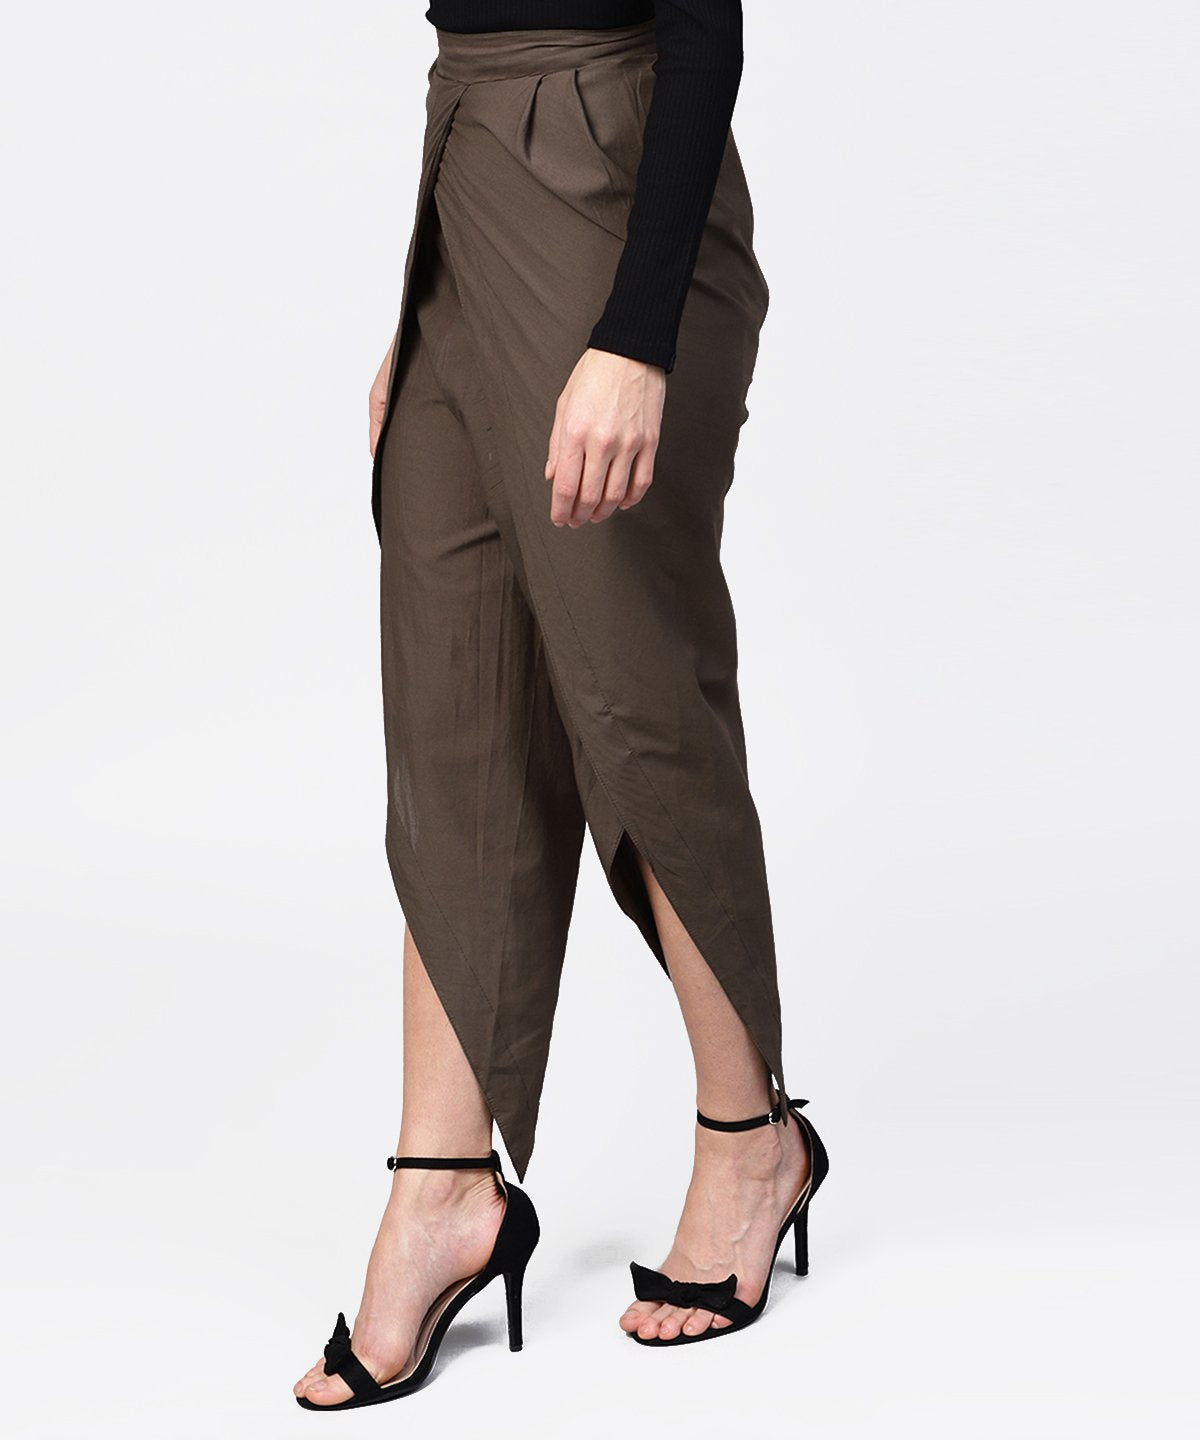 Women's Solid Black Ankle Length Cotton Tulip Pant - Nayo Clothing